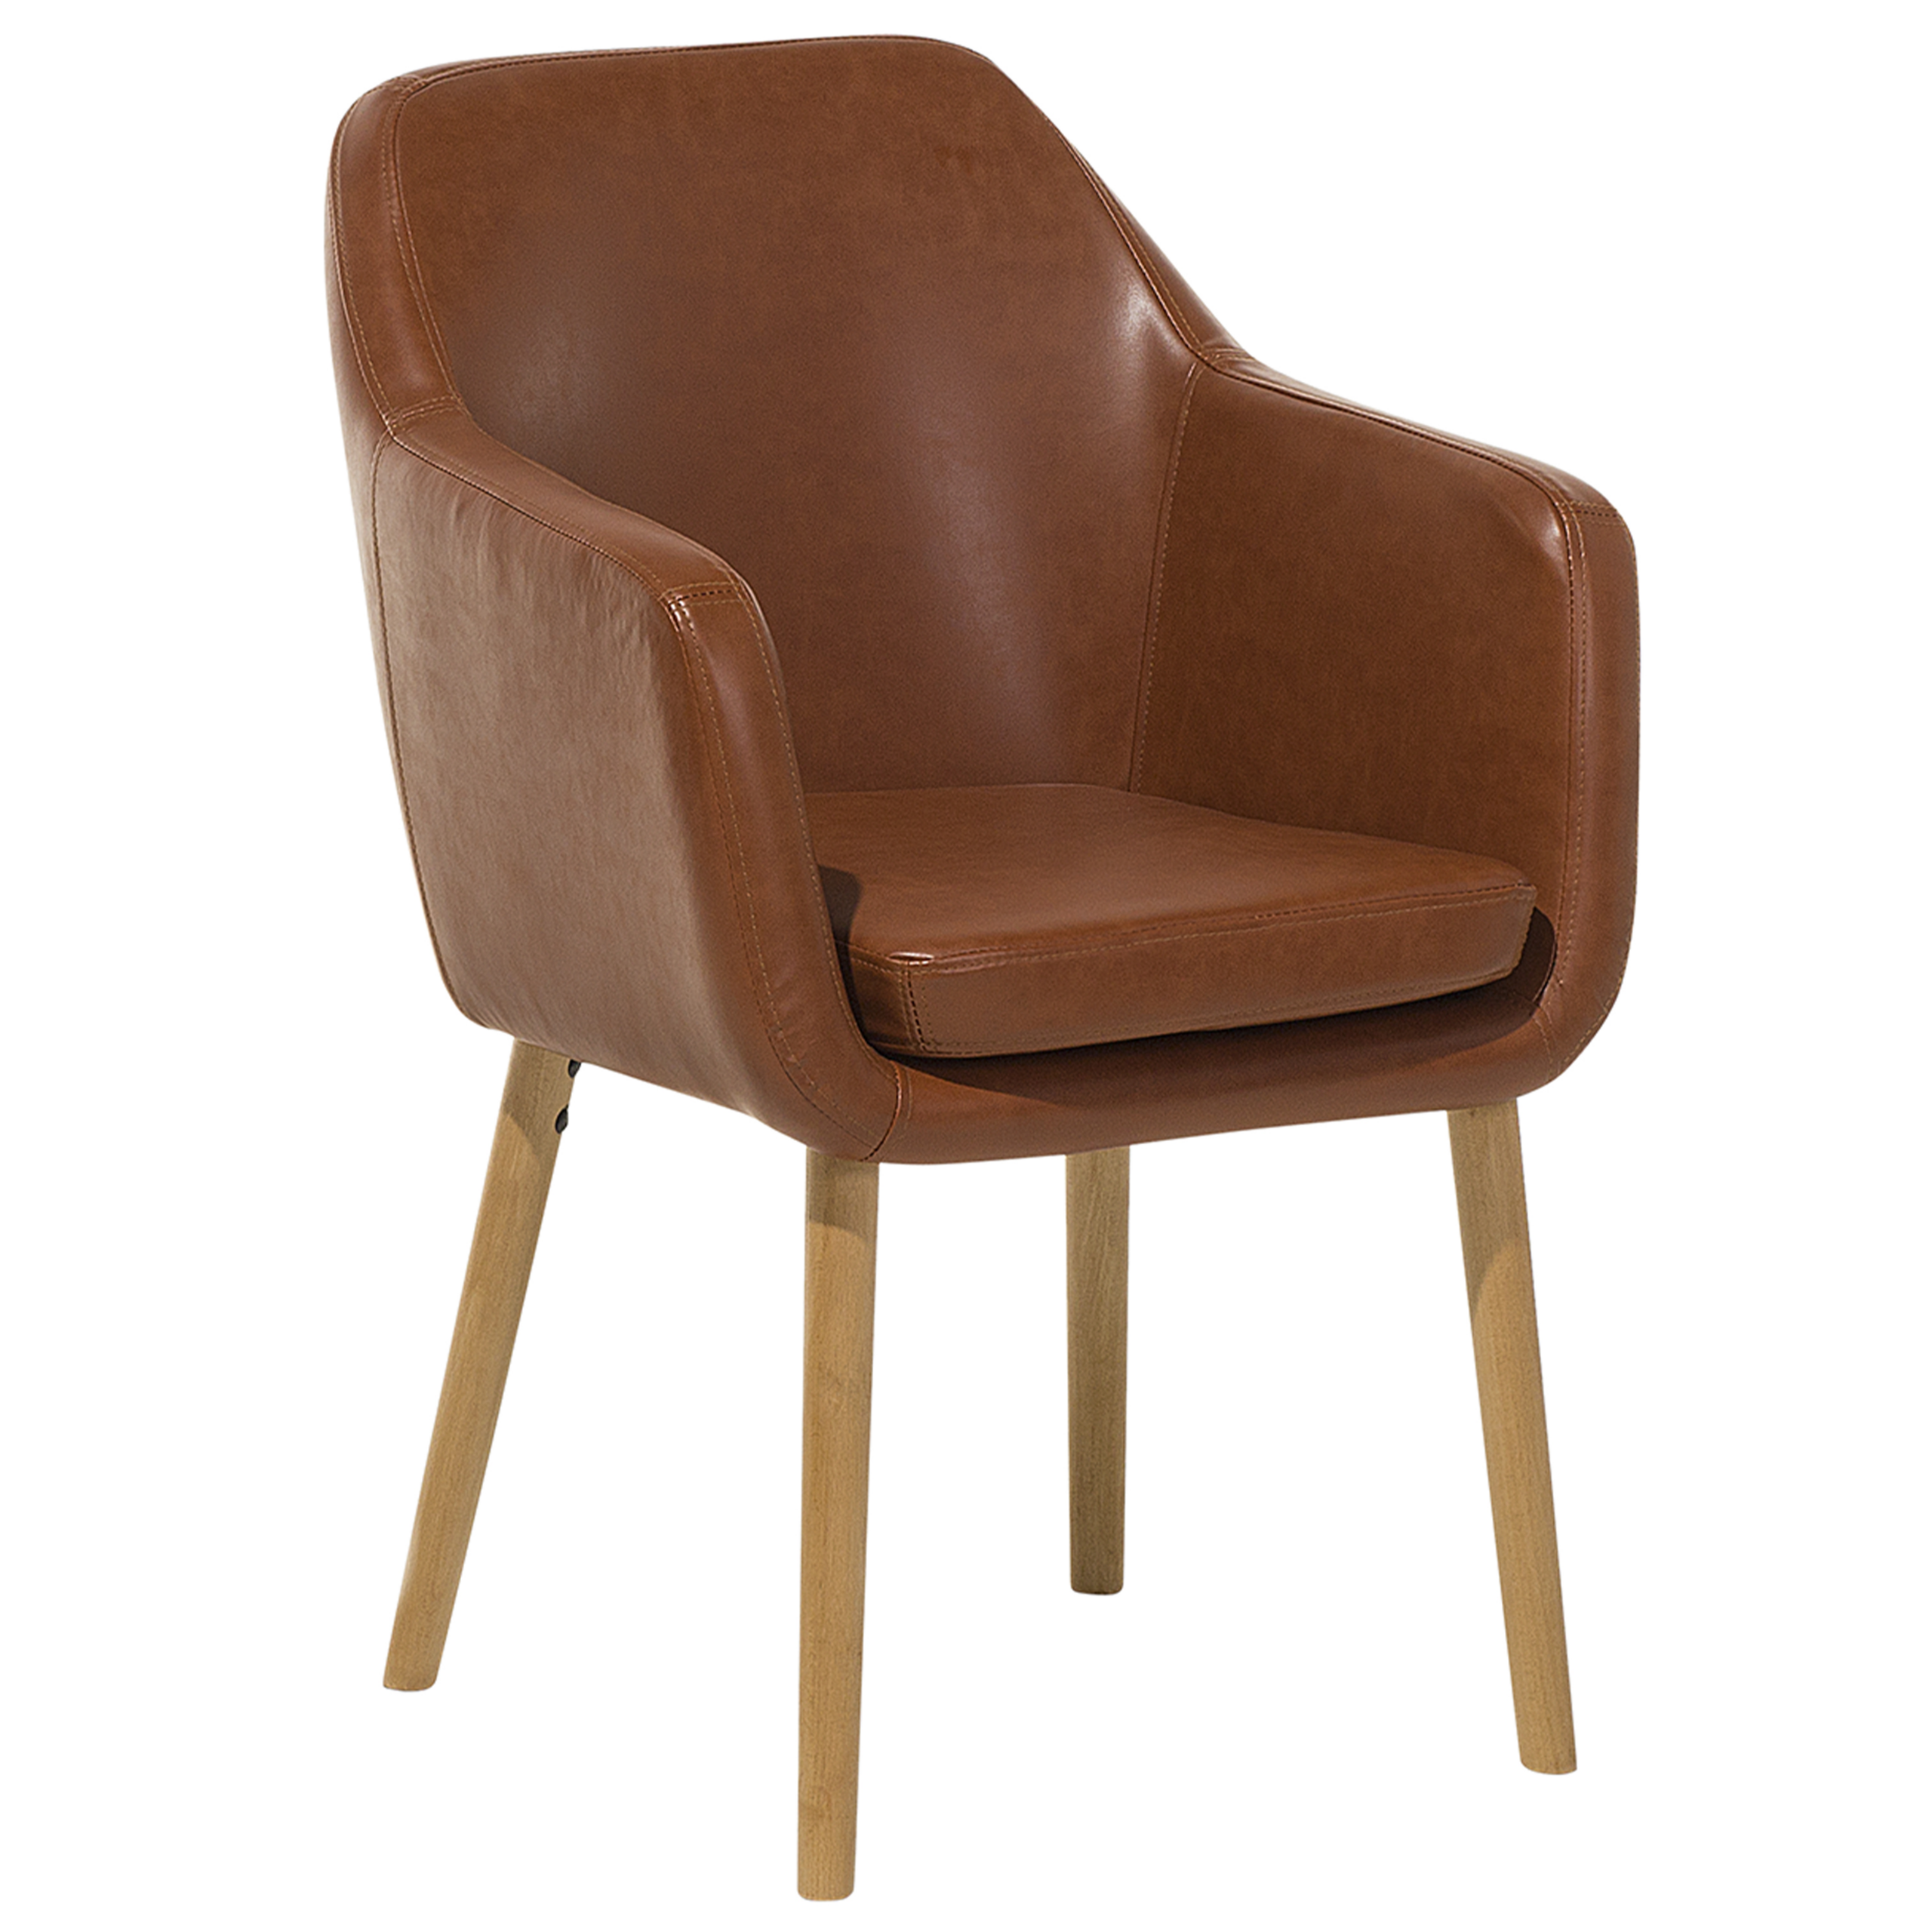 Beliani Dining Chair Golden Brown Faux Leather Upholstered Cushioned Seat Wooden Legs